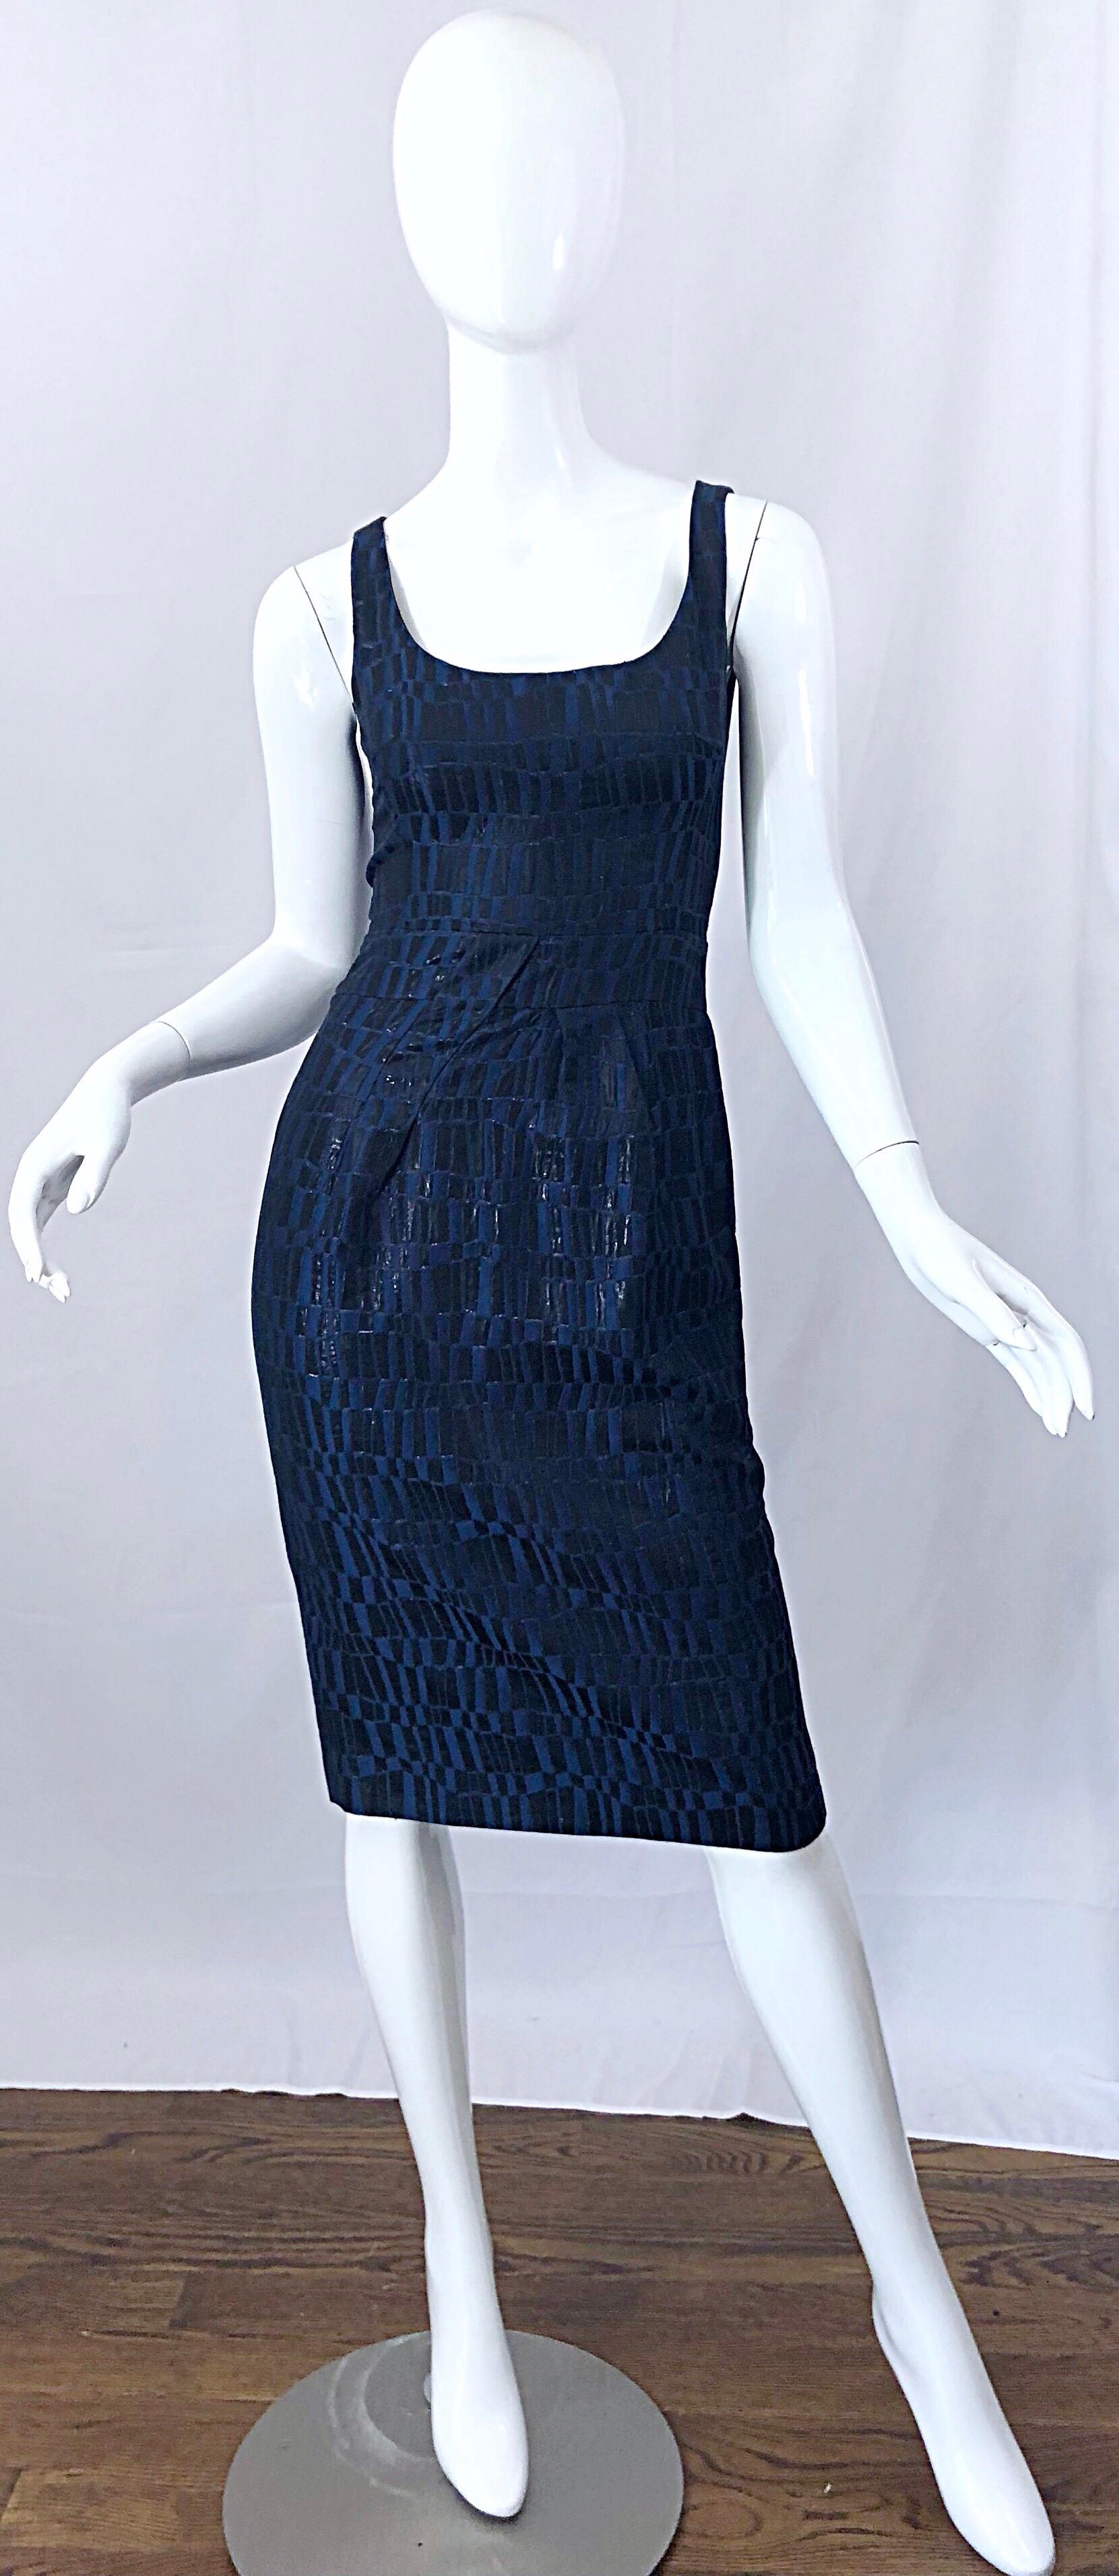 Chic and classic MICHAEL KORS COLLECTION navy blue and black metallic sheath dress. Flattering abstract geometric shapes throughout. Features Kors' signature lines and tailoring that really do flatter a woman's body. Perfect for day or evening.